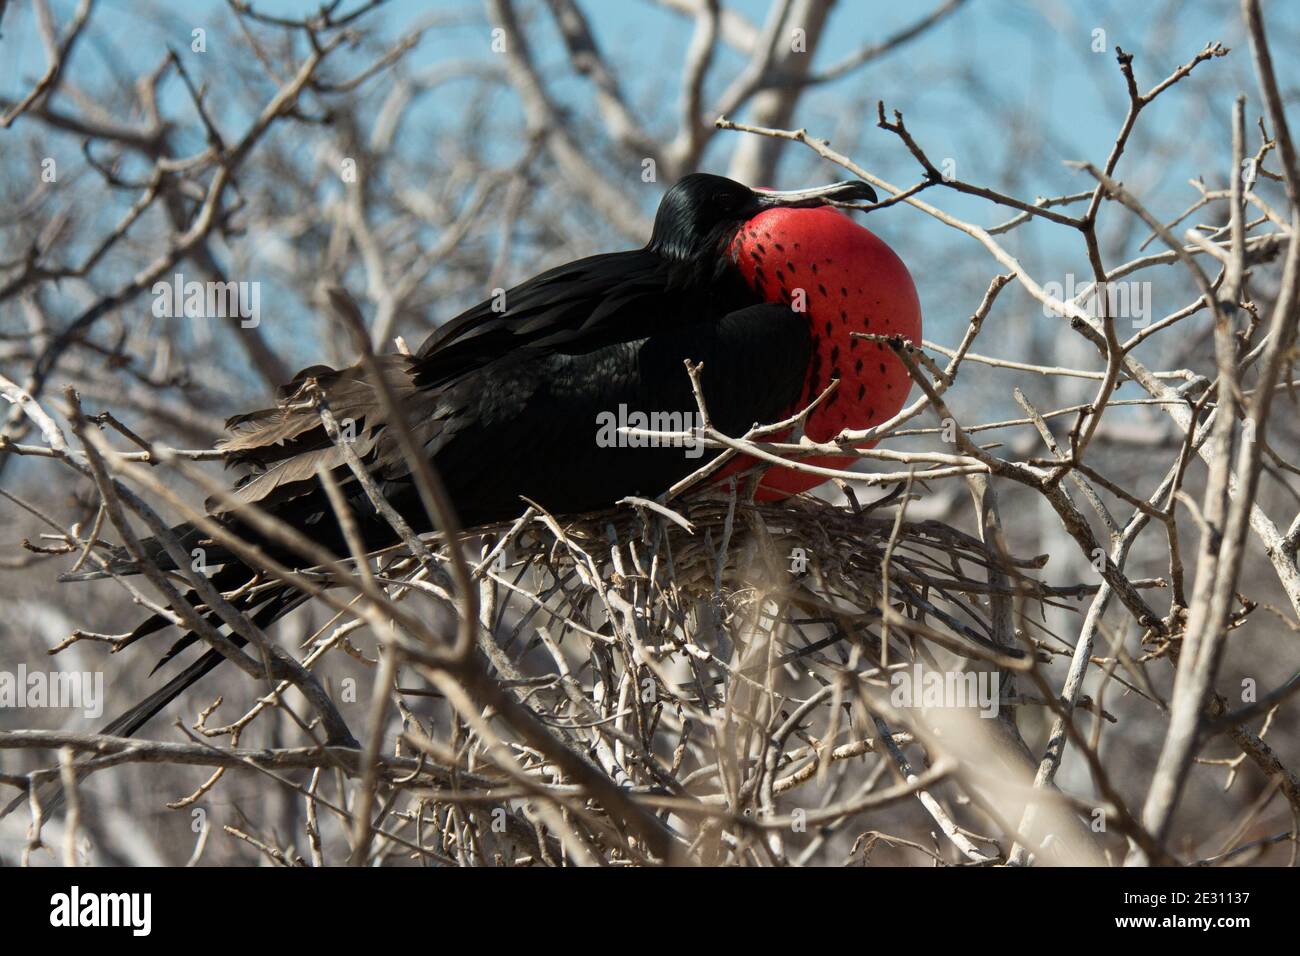 male magnificent frigatebird with inflated gular sac sitting on some shrub at North Seymour Island in the Galapagos Archipelago. Stock Photo